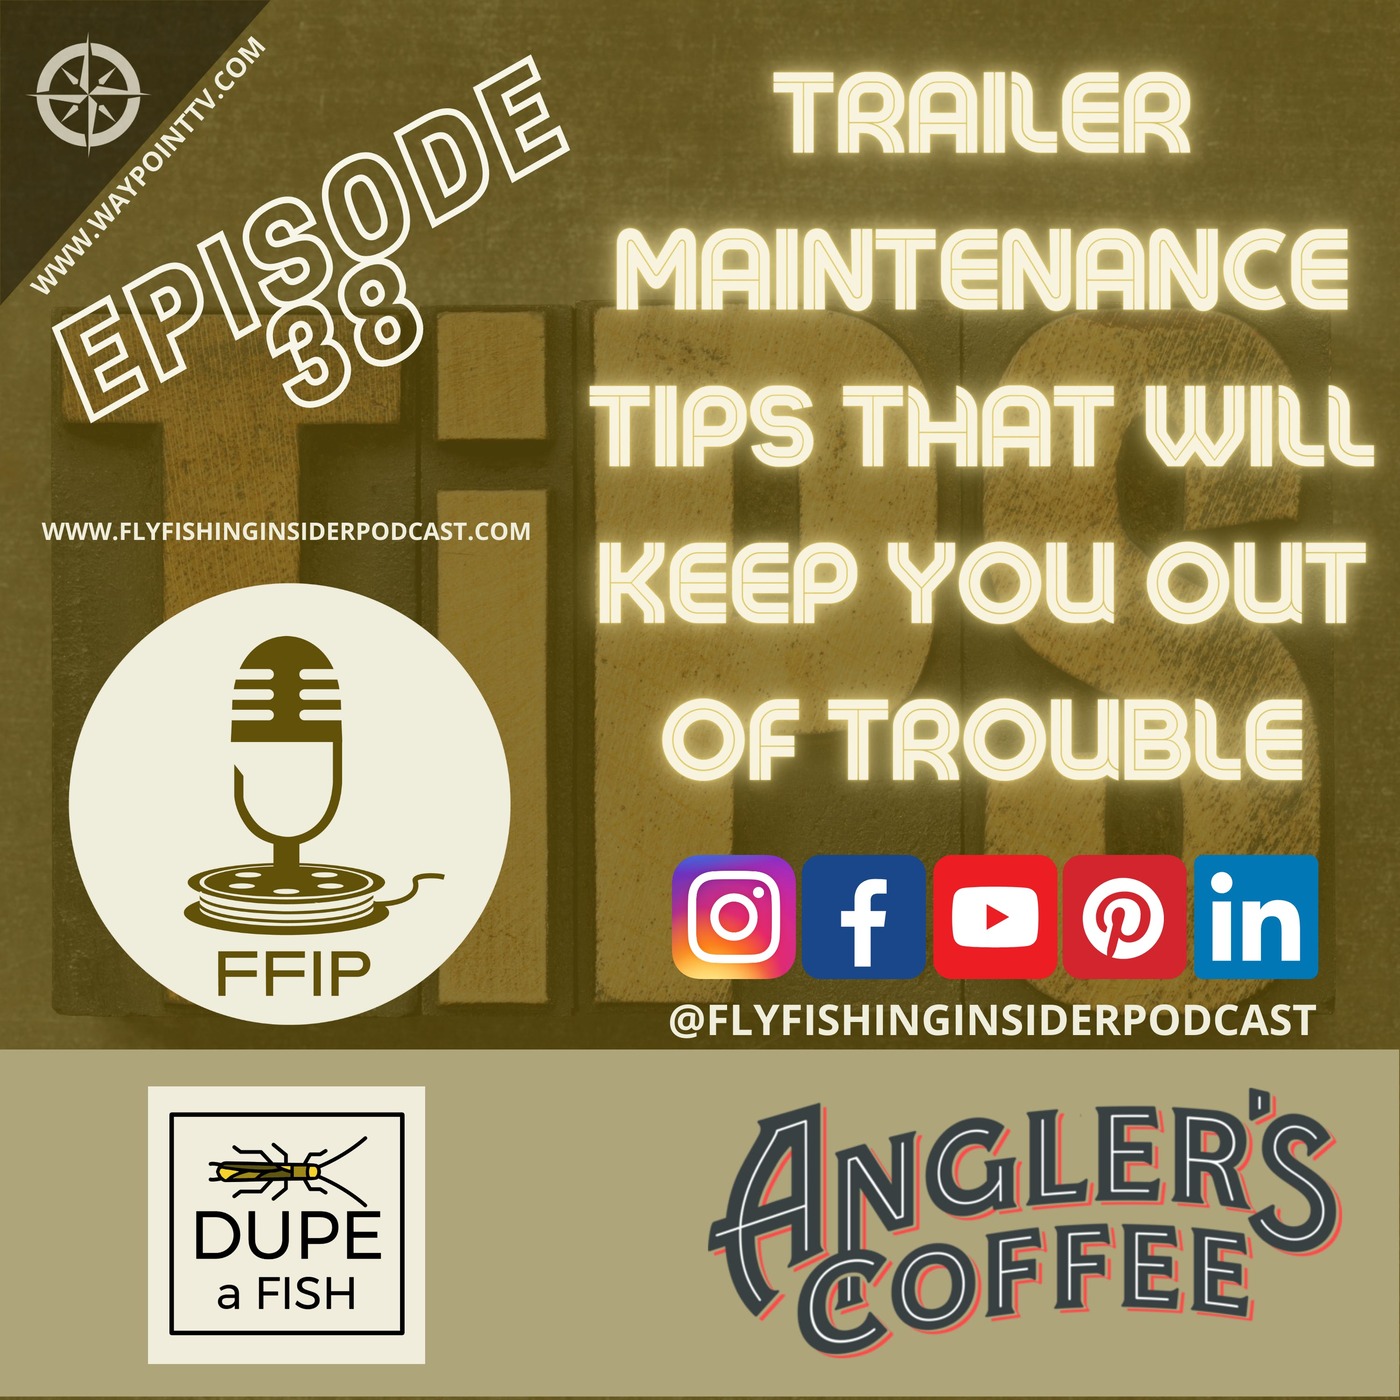 Fishing Boat Trailer Maintenance Tips that Will Keep You Out of Trouble